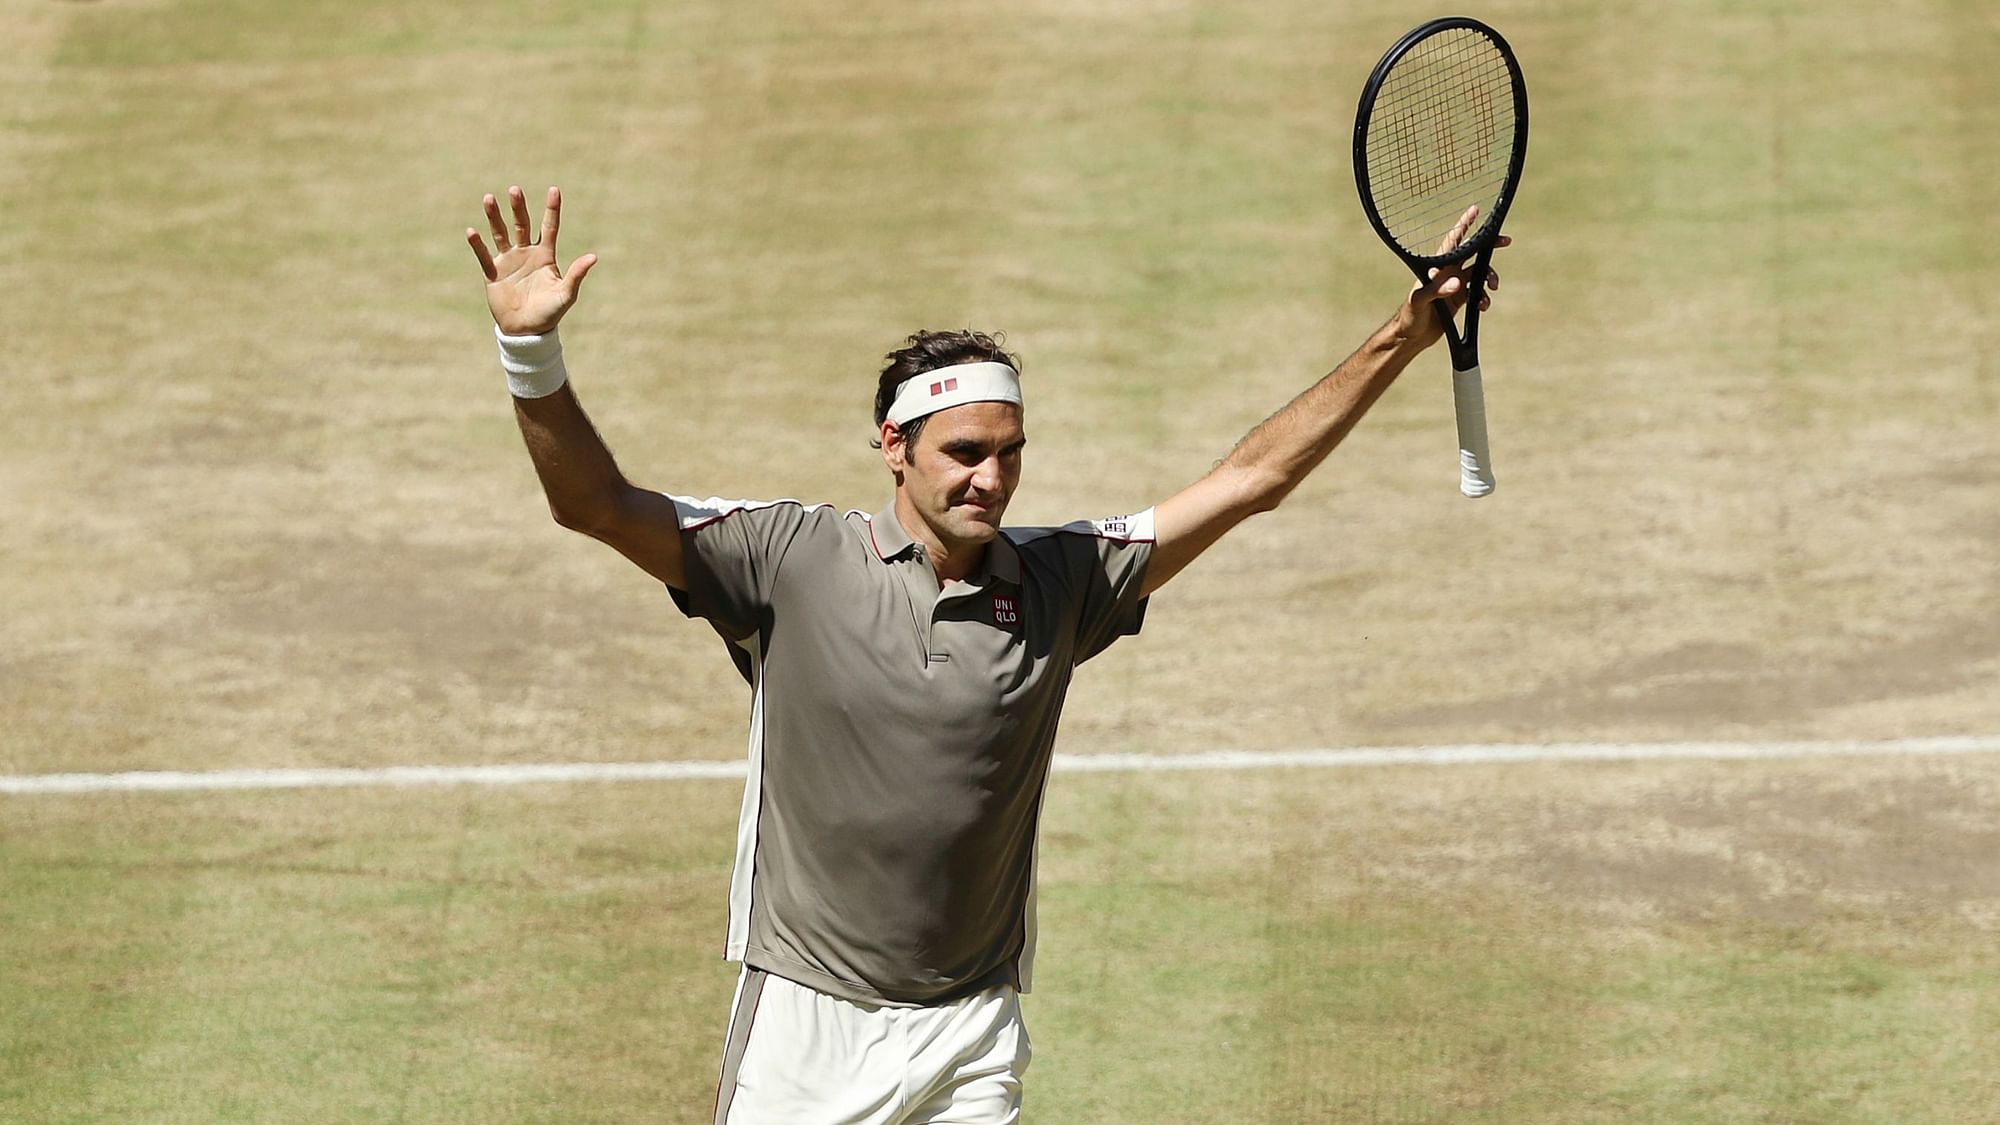 Eight-time champion Roger Federer was seeded No. 2 for Wimbledon, one spot ahead of Rafael Nadal.